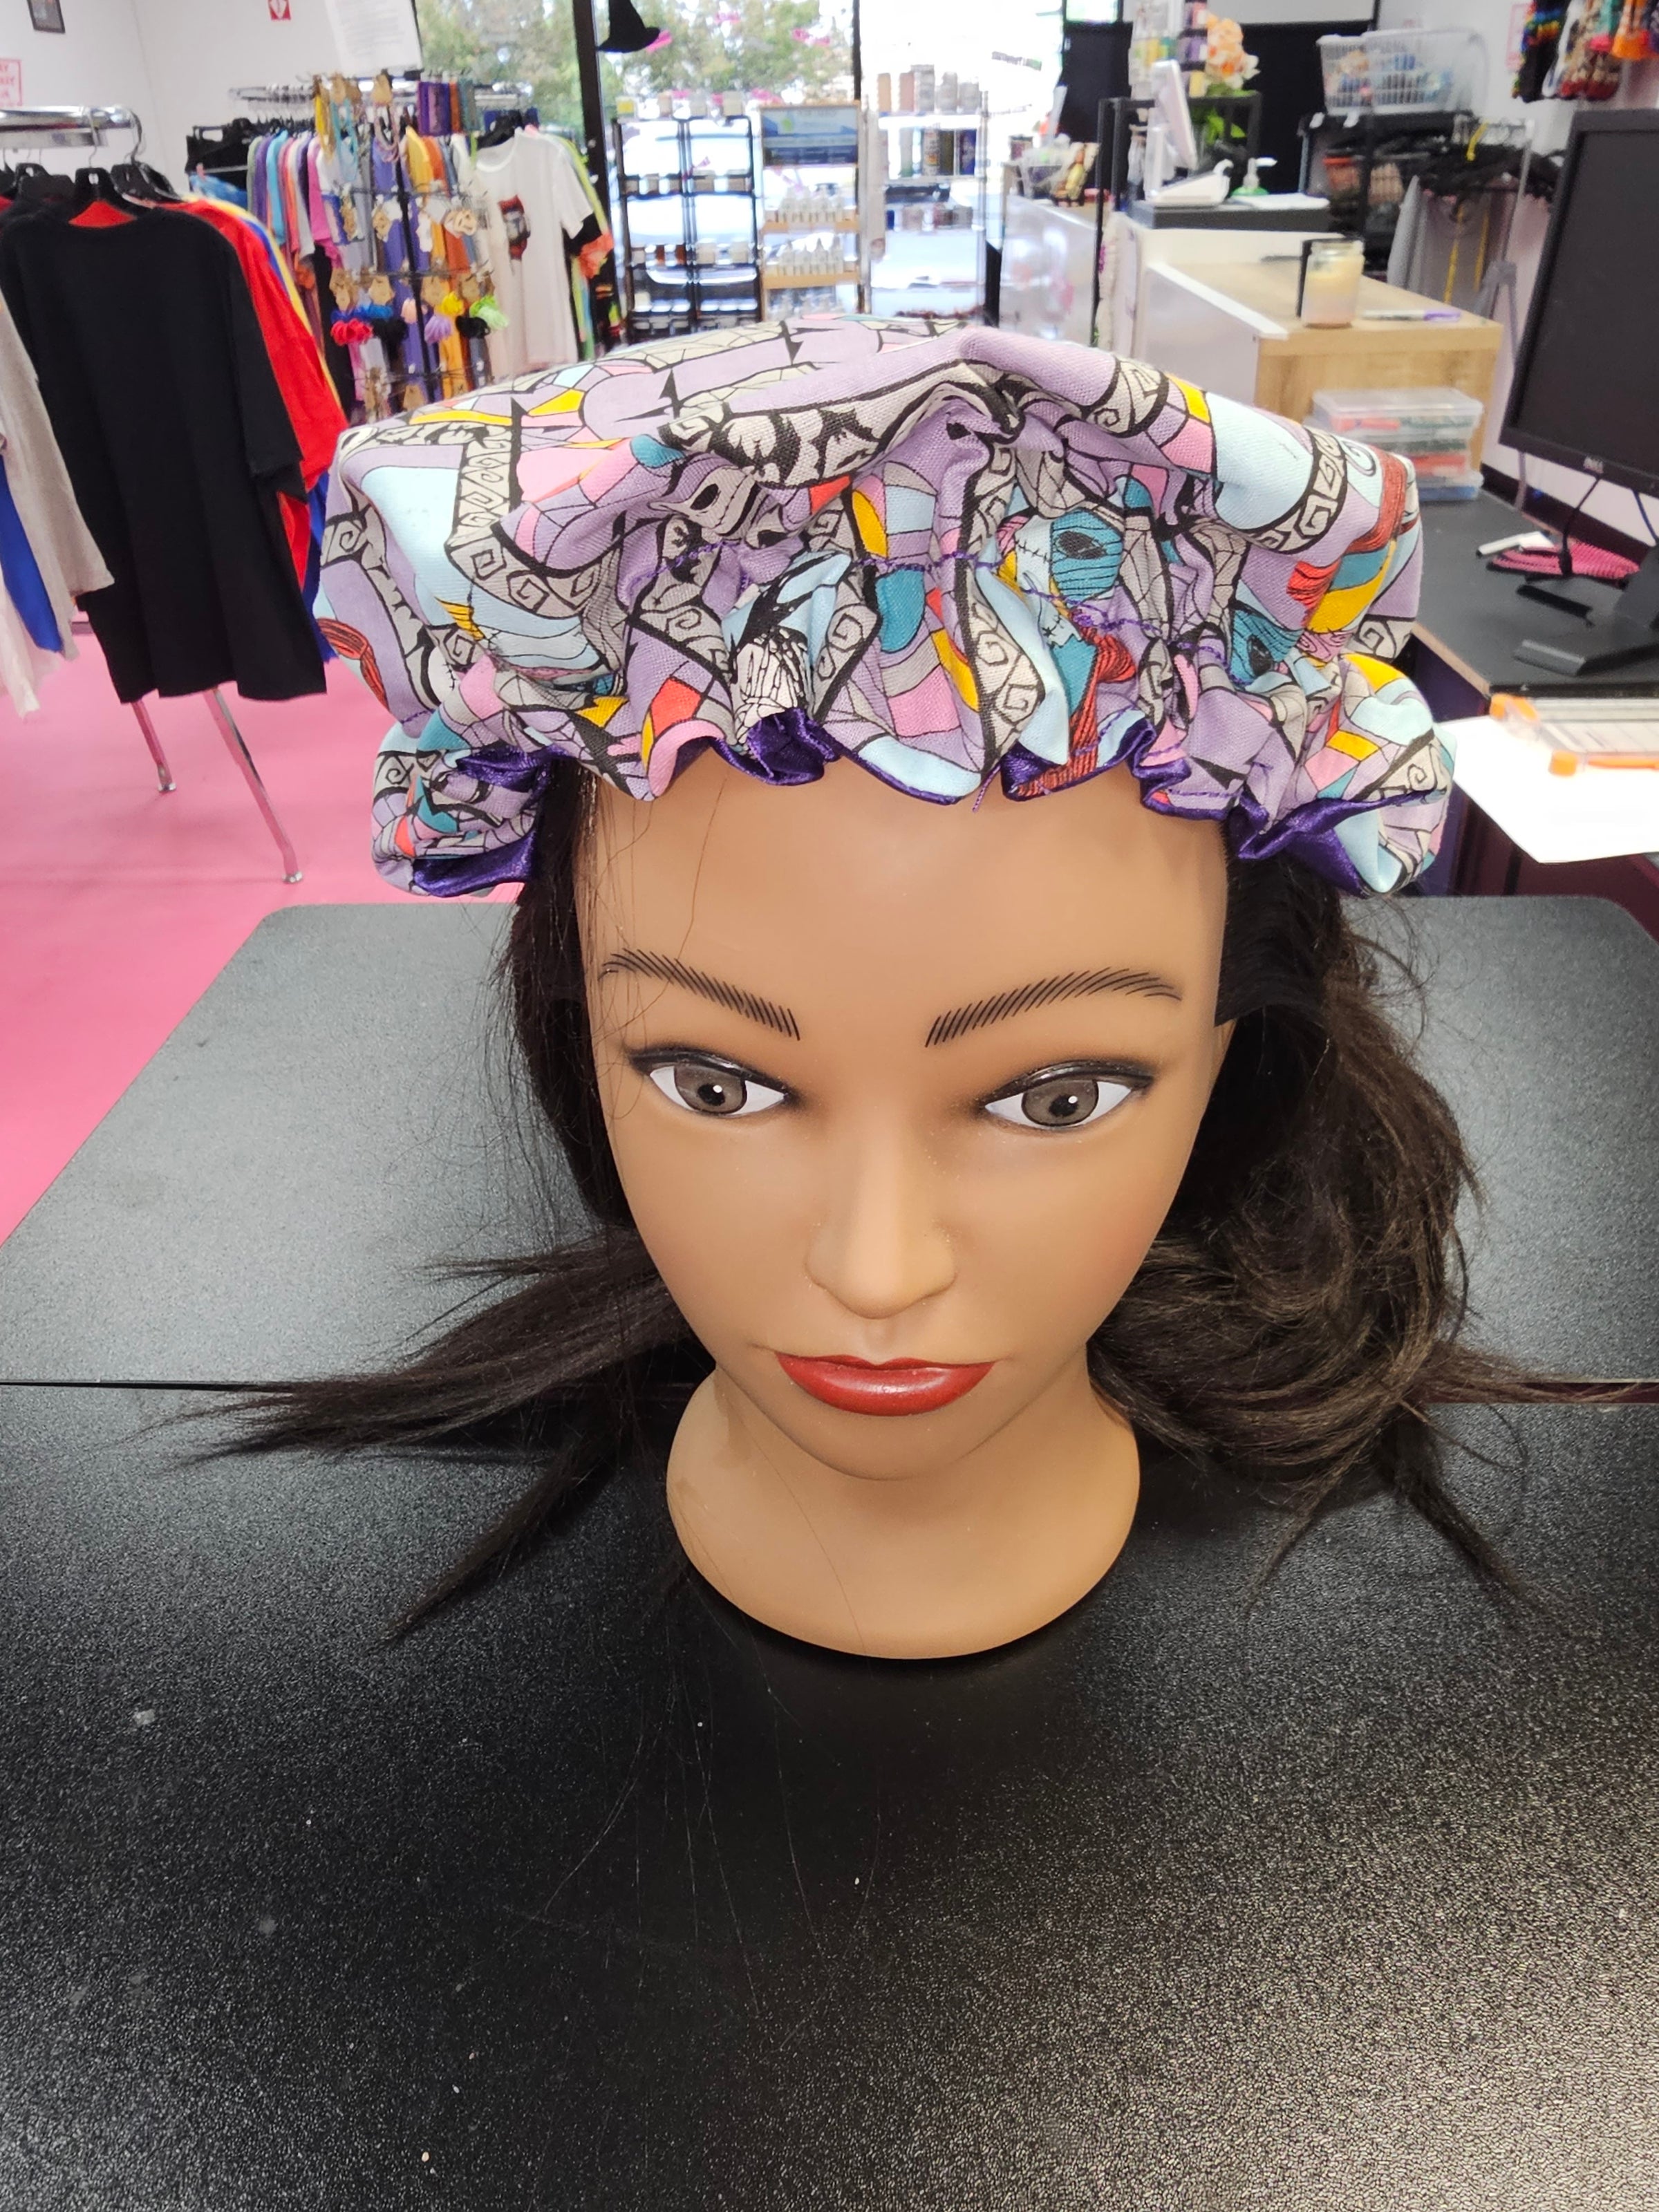 Customized Hair Bonnets in Ojo - Clothing Accessories, Bekay